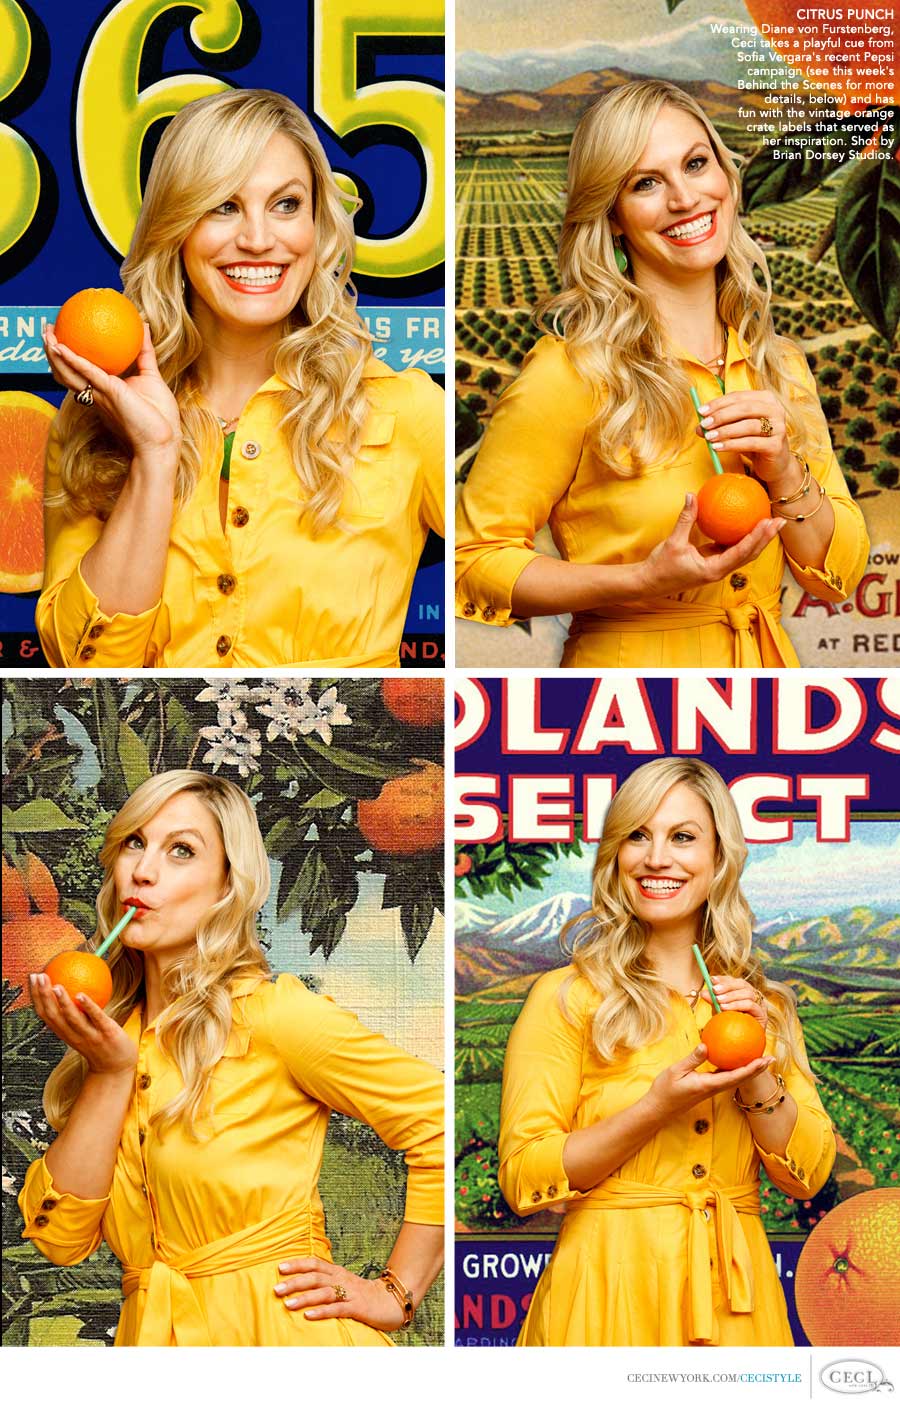 Ceci Johnson of Ceci New York - CITRUS PUNCH: Wearing Diane von Furstenberg, Ceci takes a playful cue from Sofia Vergara's recent Pepsi commercials (see this week's Behind the Scenes for more details, below) and has fun with the vintage orange crate labels that served as her inspiration. Shot by Brian Dorsey Studios.